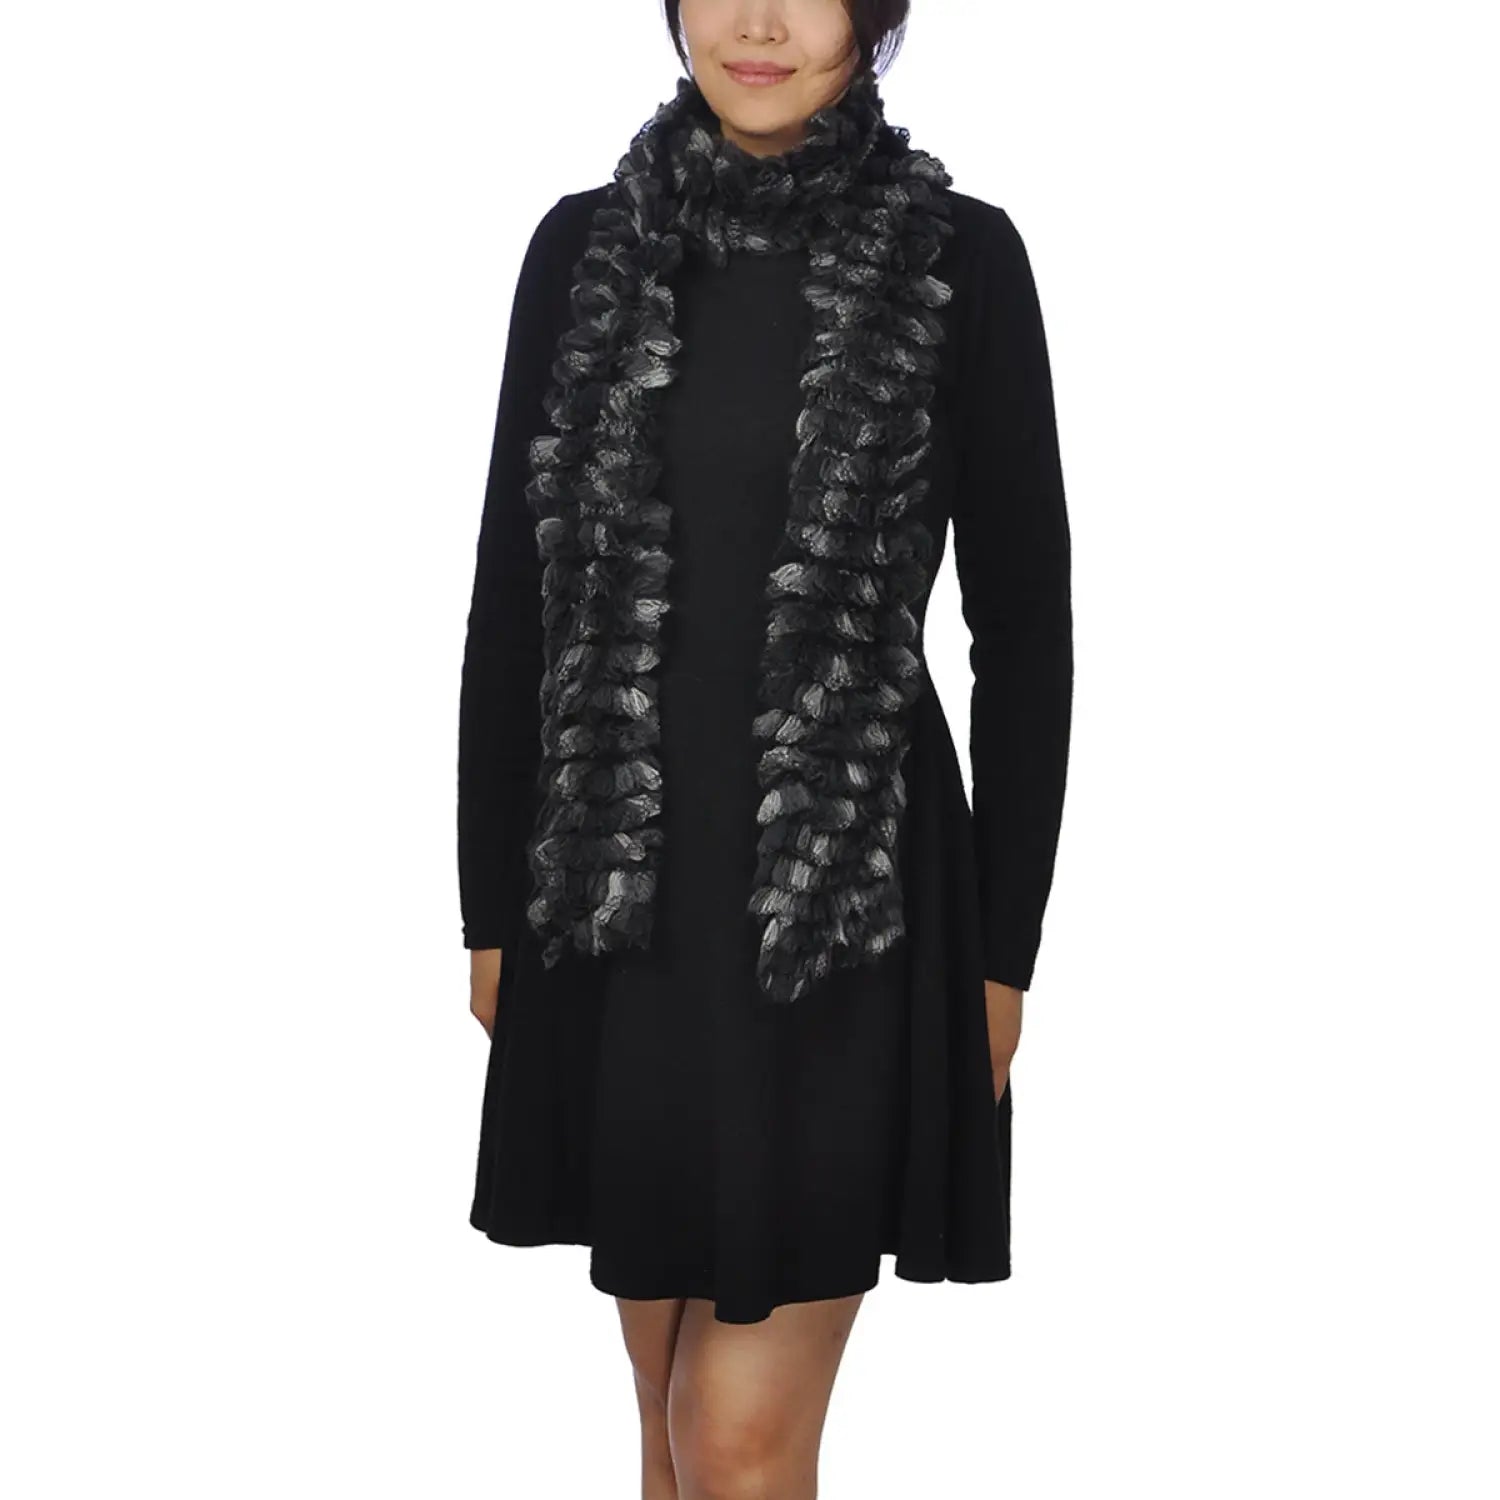 Woman in black dress and scarf with multicoloured textured boa print.